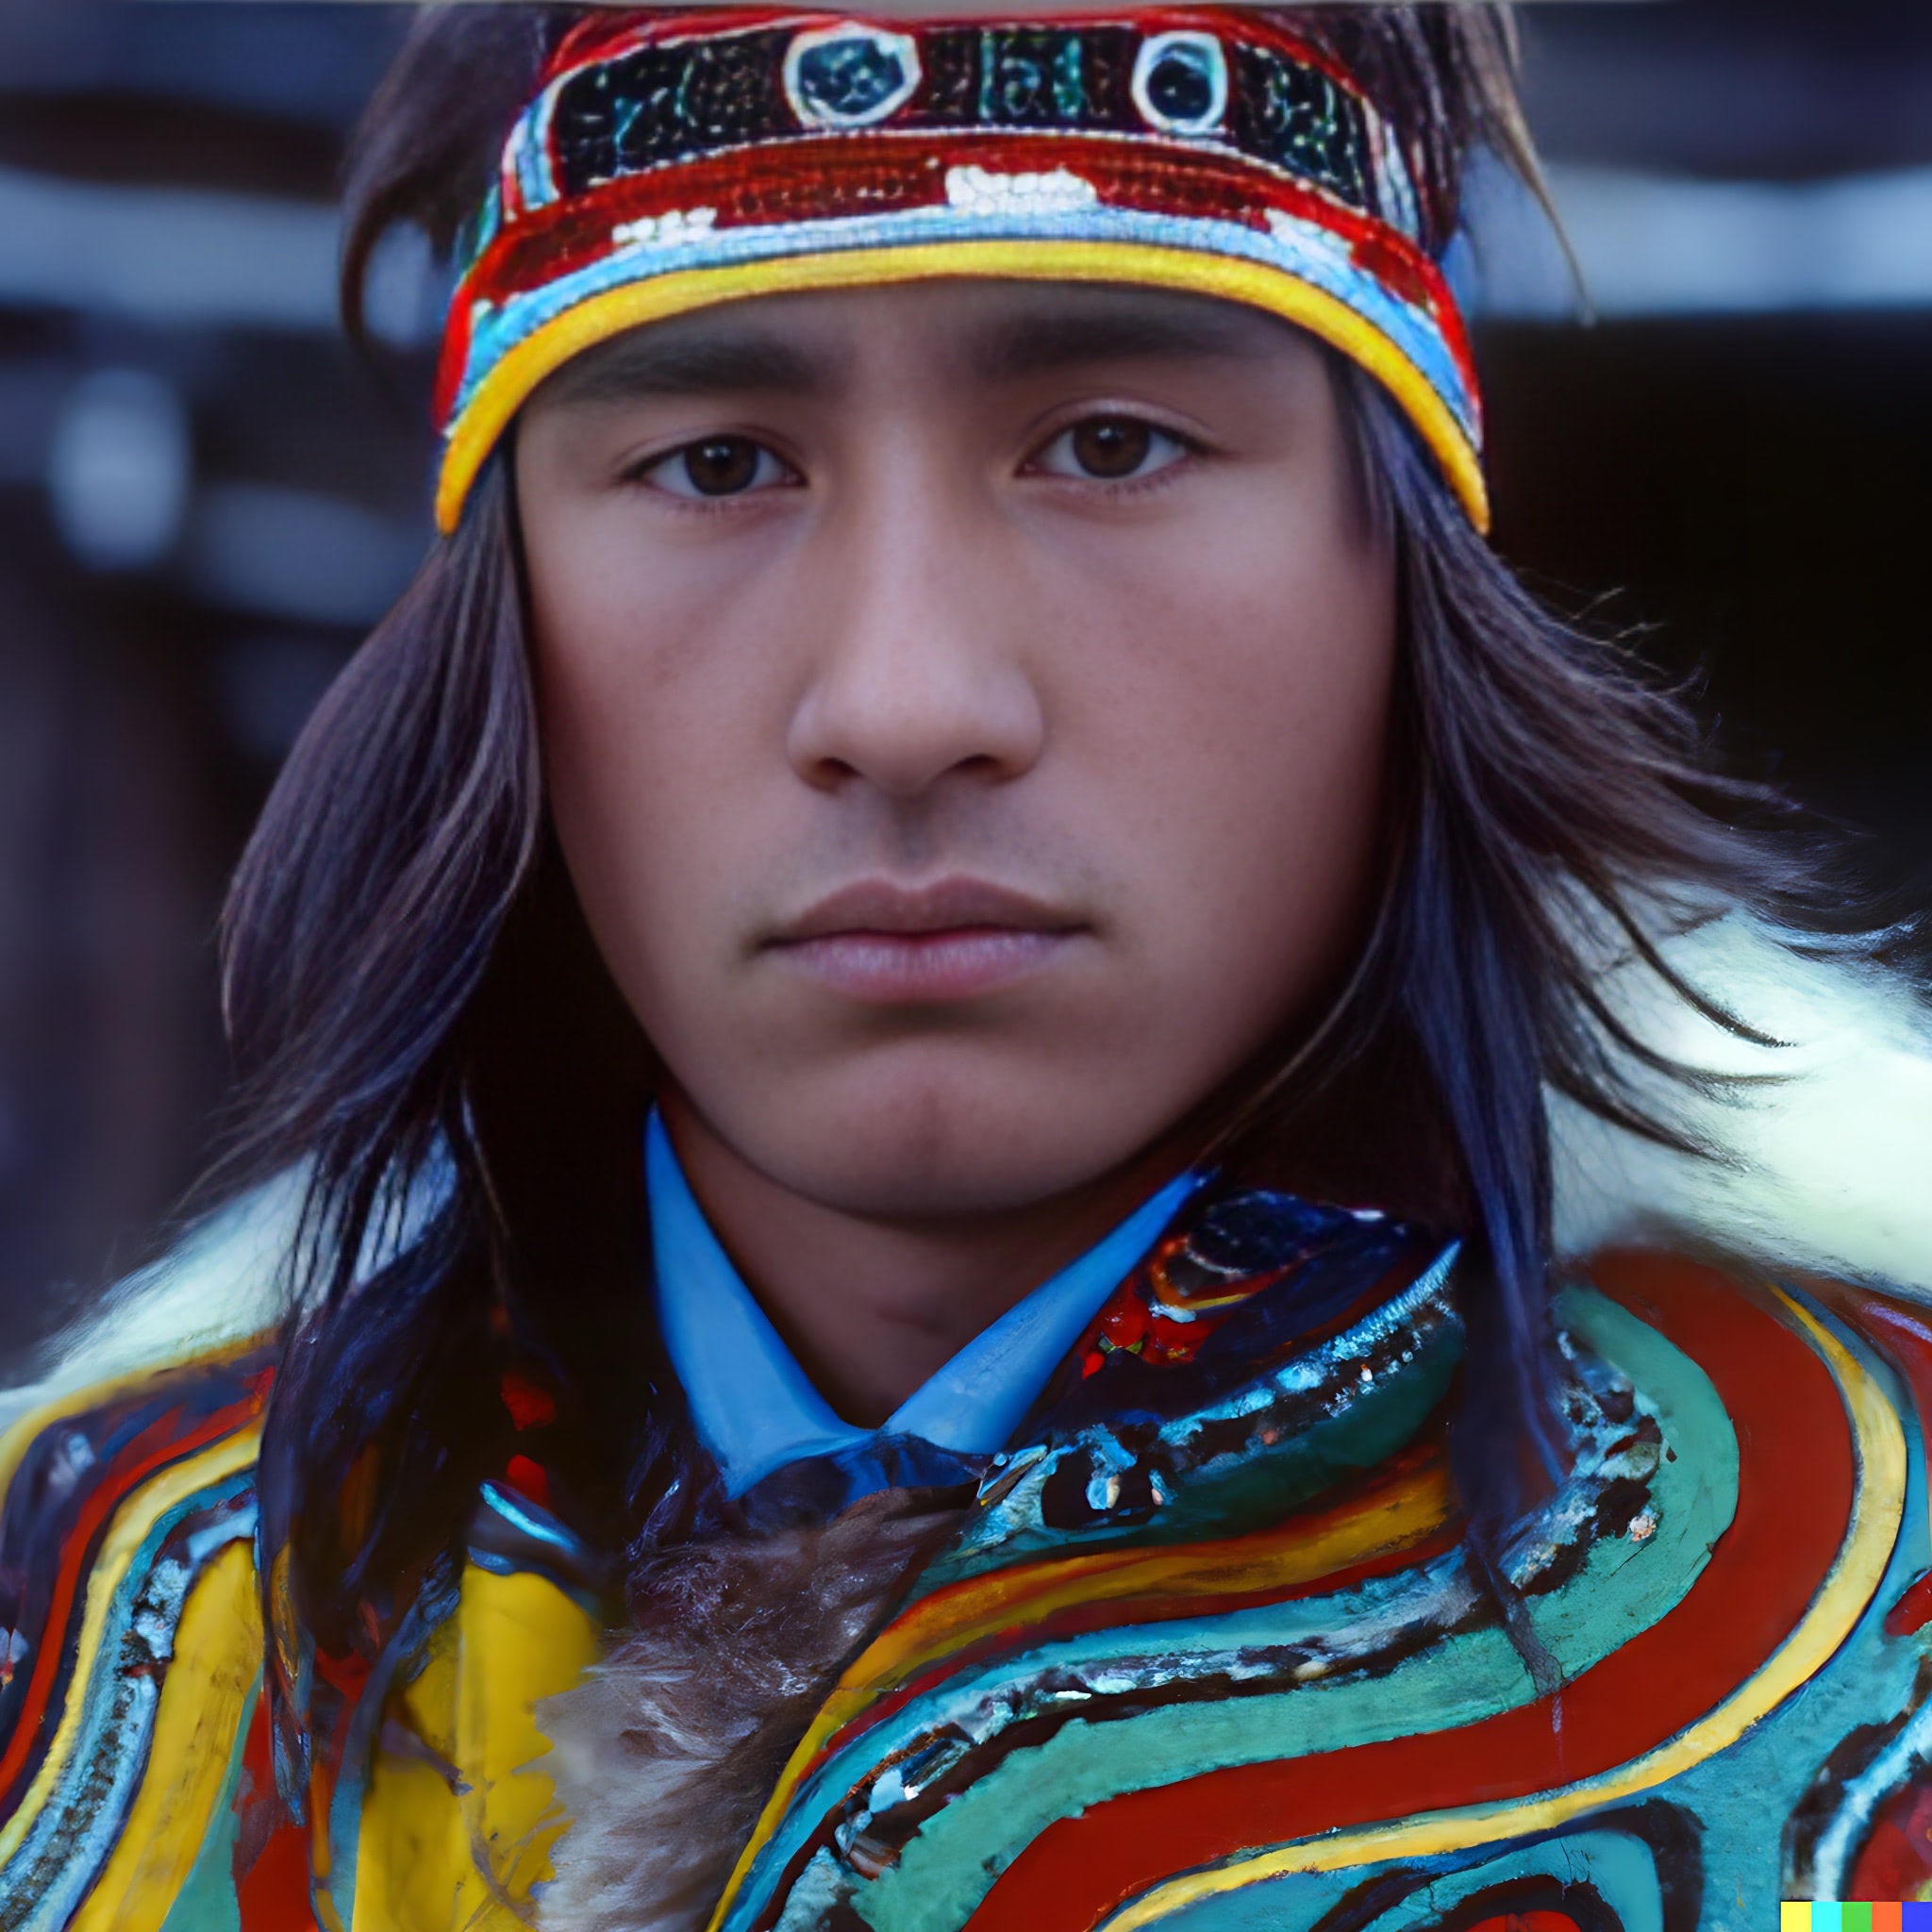 indigenous-with-traditional-colorful-winter-clothes-with-dark-hair-1